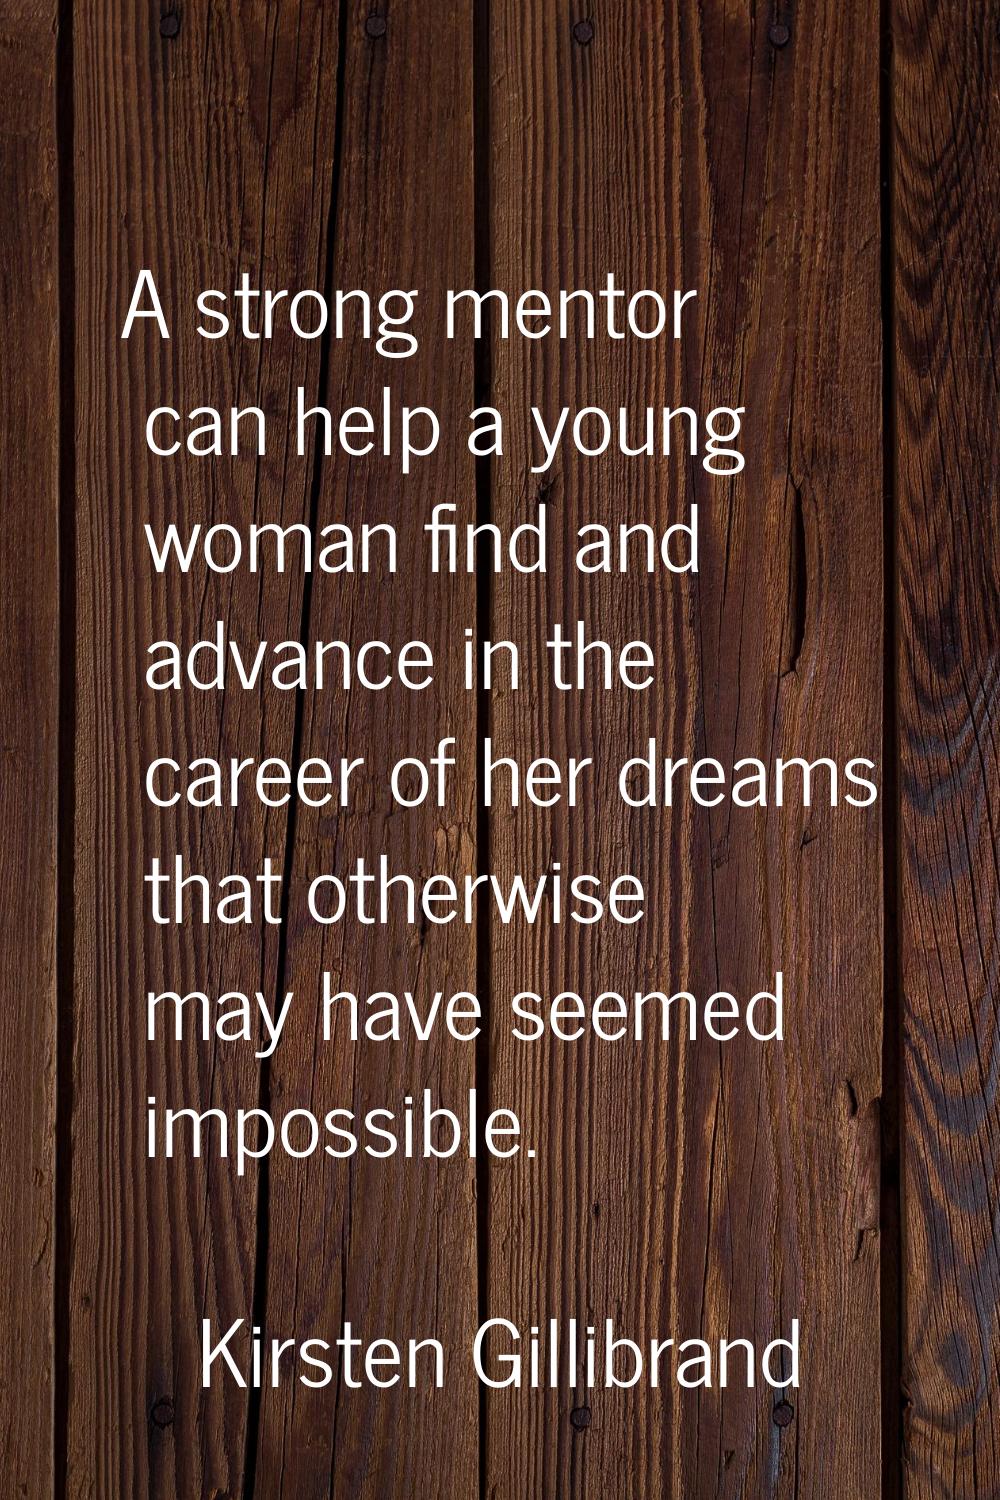 A strong mentor can help a young woman find and advance in the career of her dreams that otherwise 